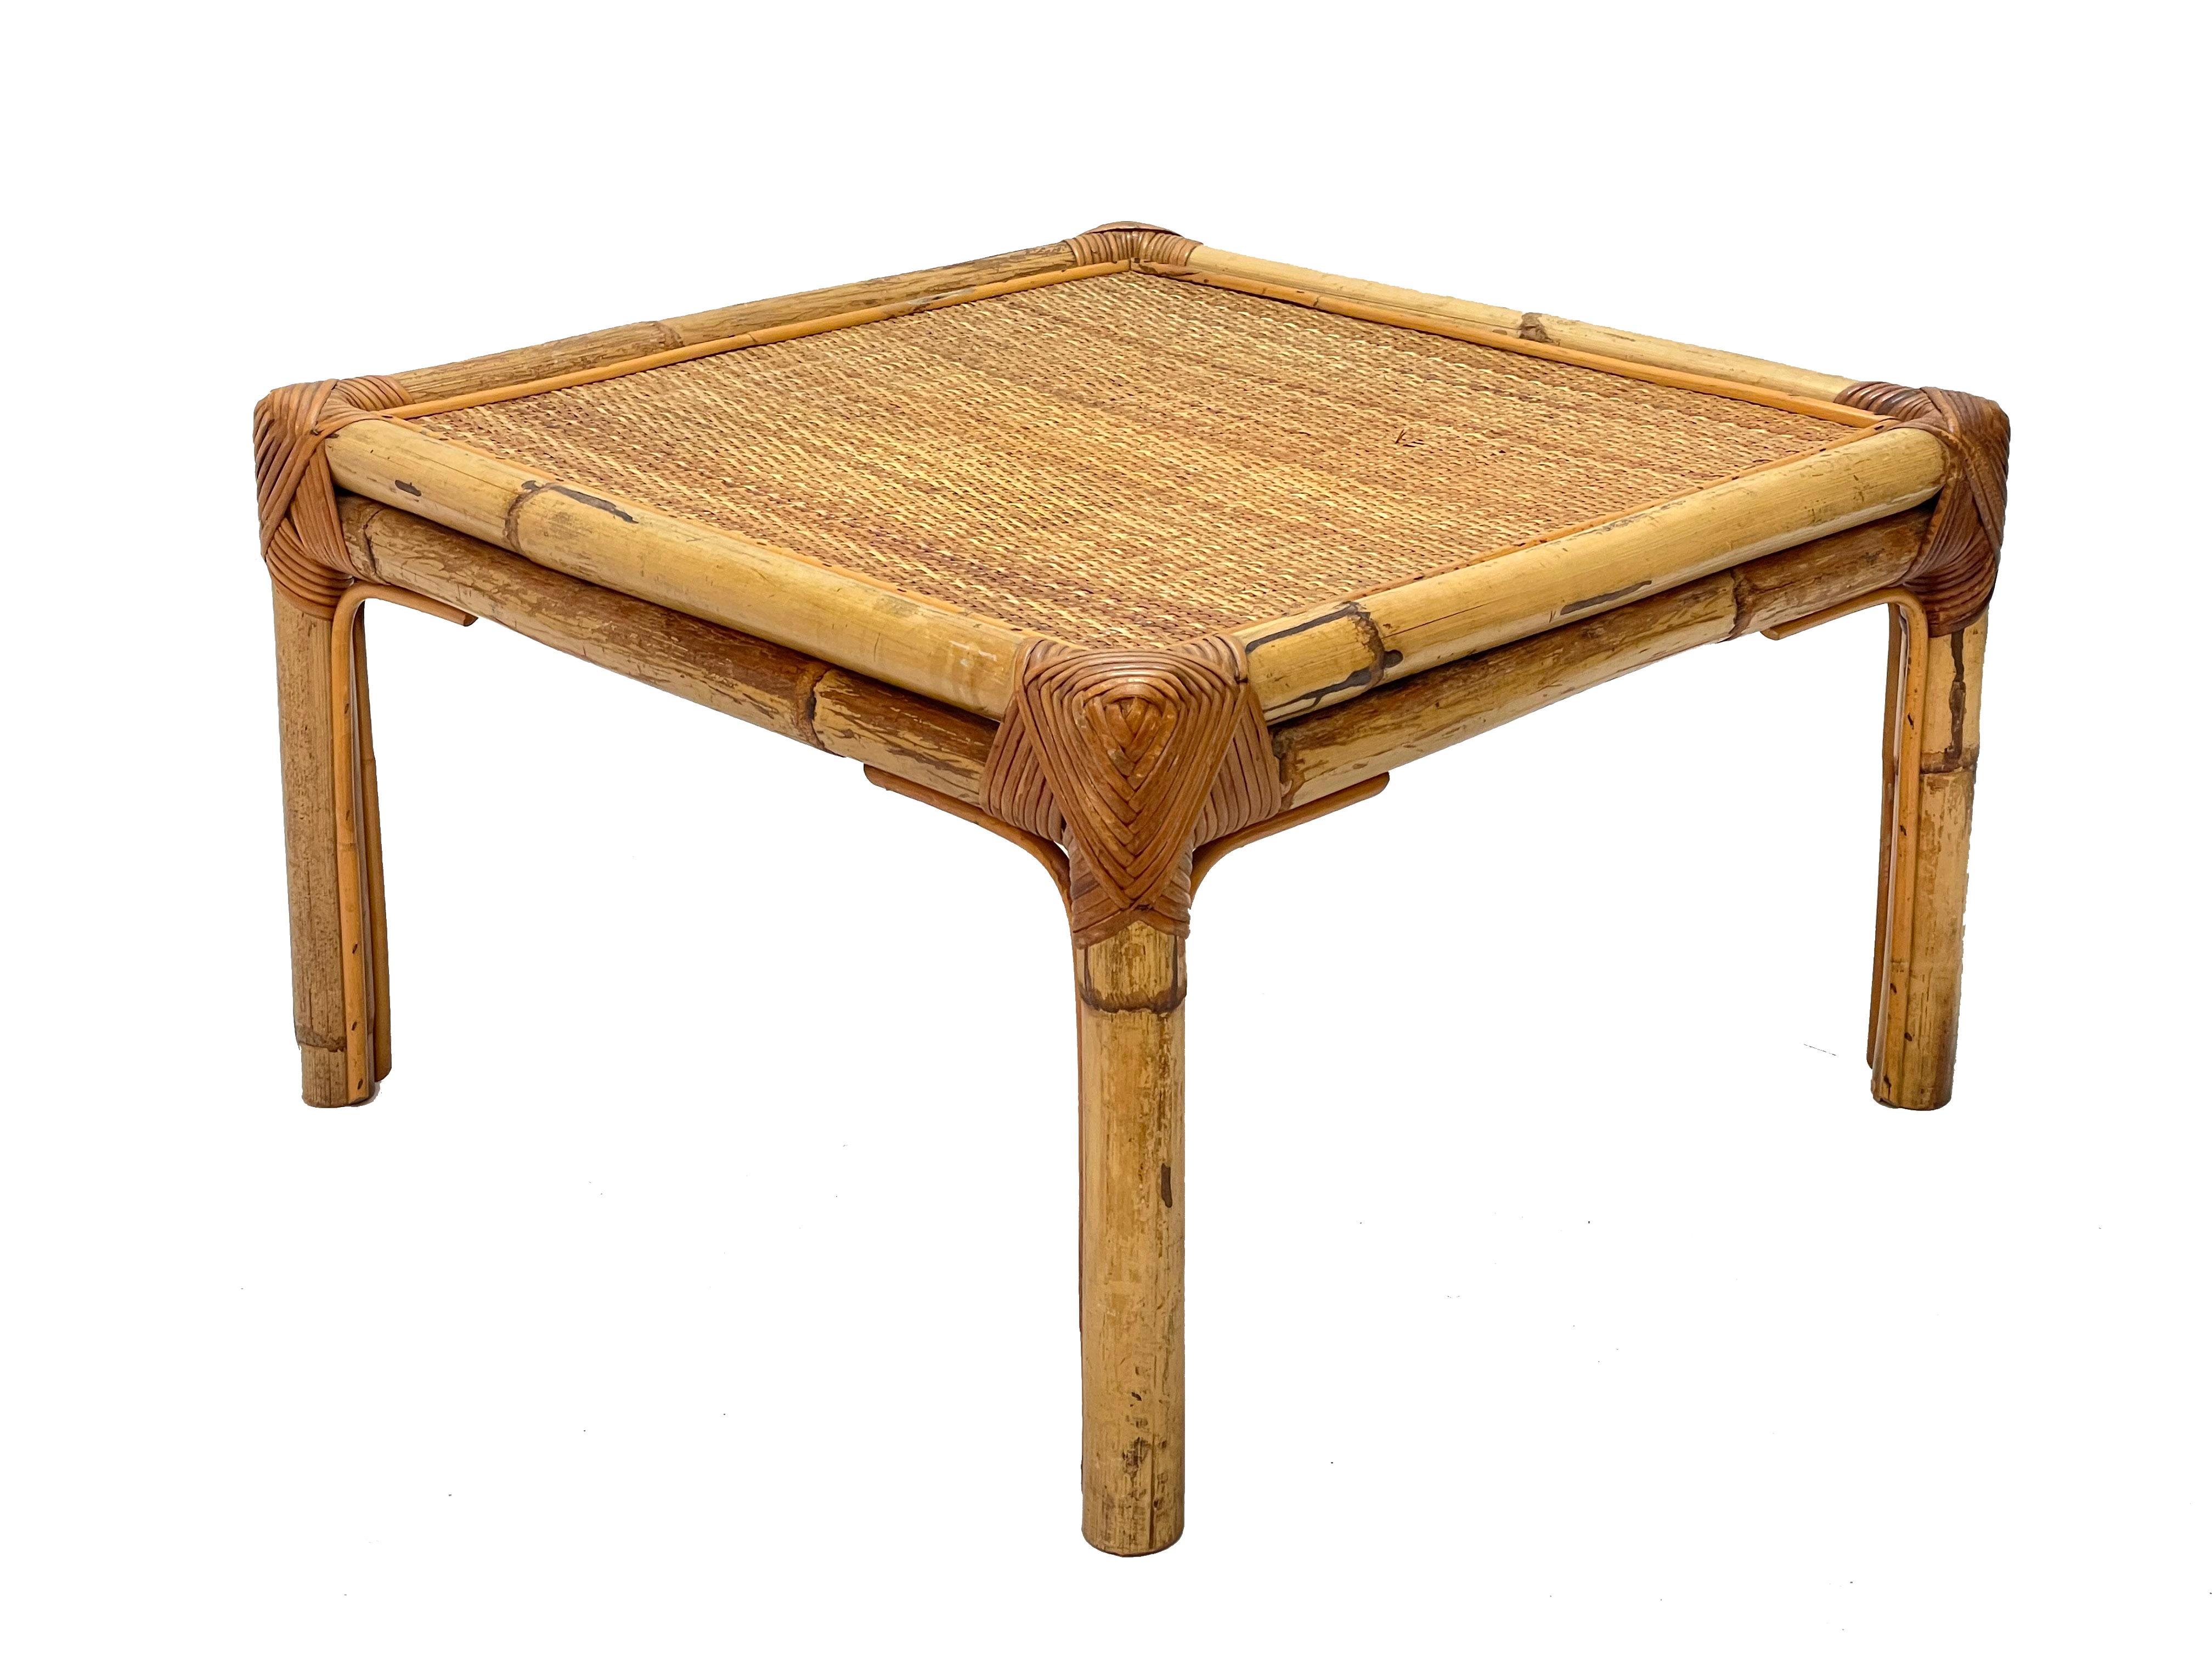 Amazing Mid-Century Modern Italian bamboo and rattan squared coffee table. This wonderful item was designed by Vivai del Sud in Italy during the 1970s.

You are going to love the solid structure of this table, straight lines of the bamboo kept